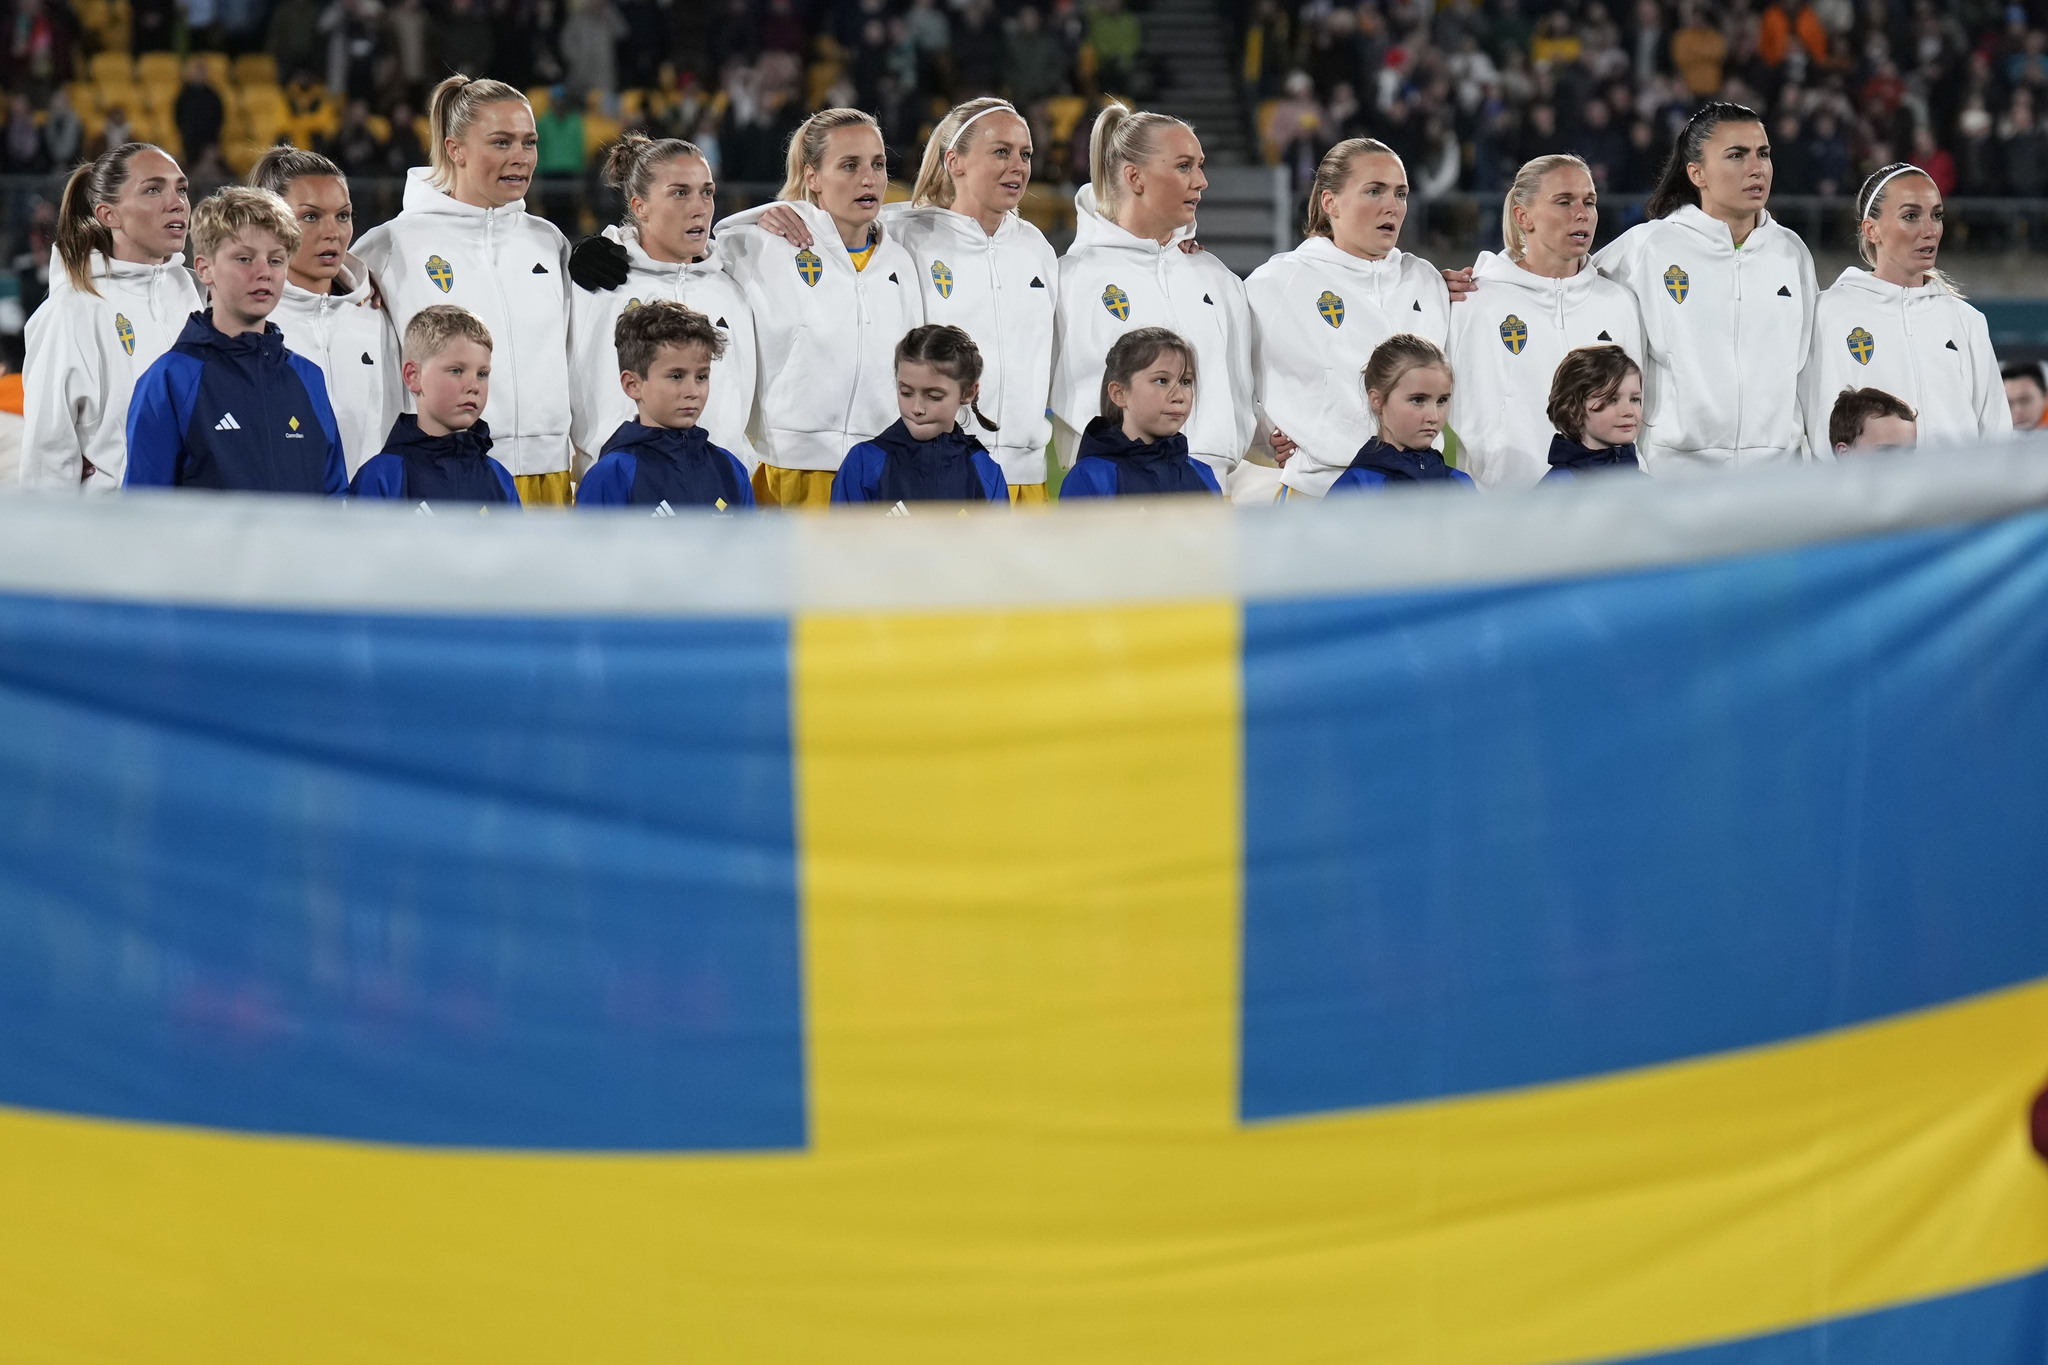 Sweden: The USA's 'bogie team'  and biggest rival in recent years